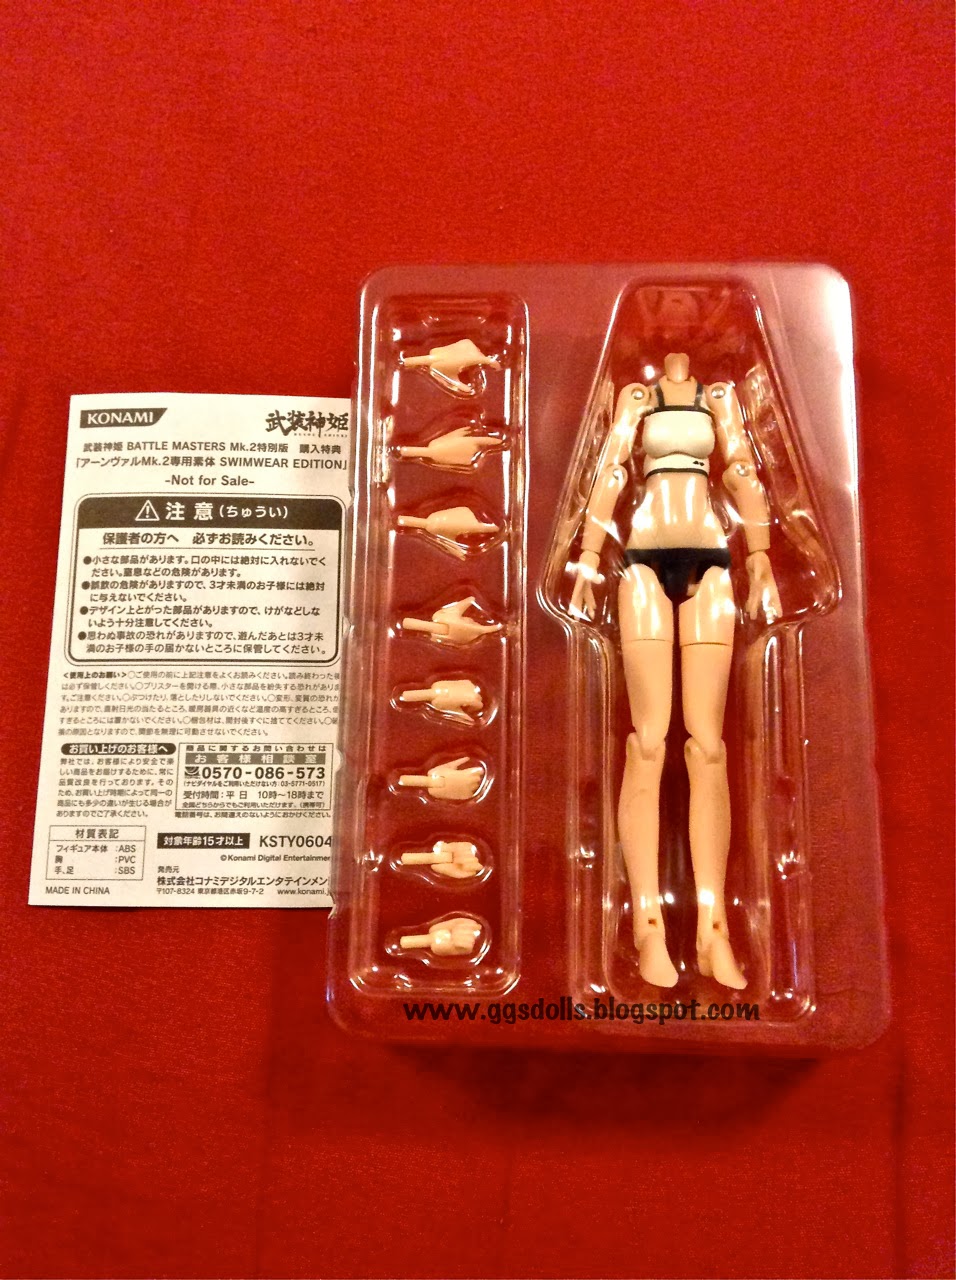 ggsdolls: Another Bod in 1/12th Scale!!